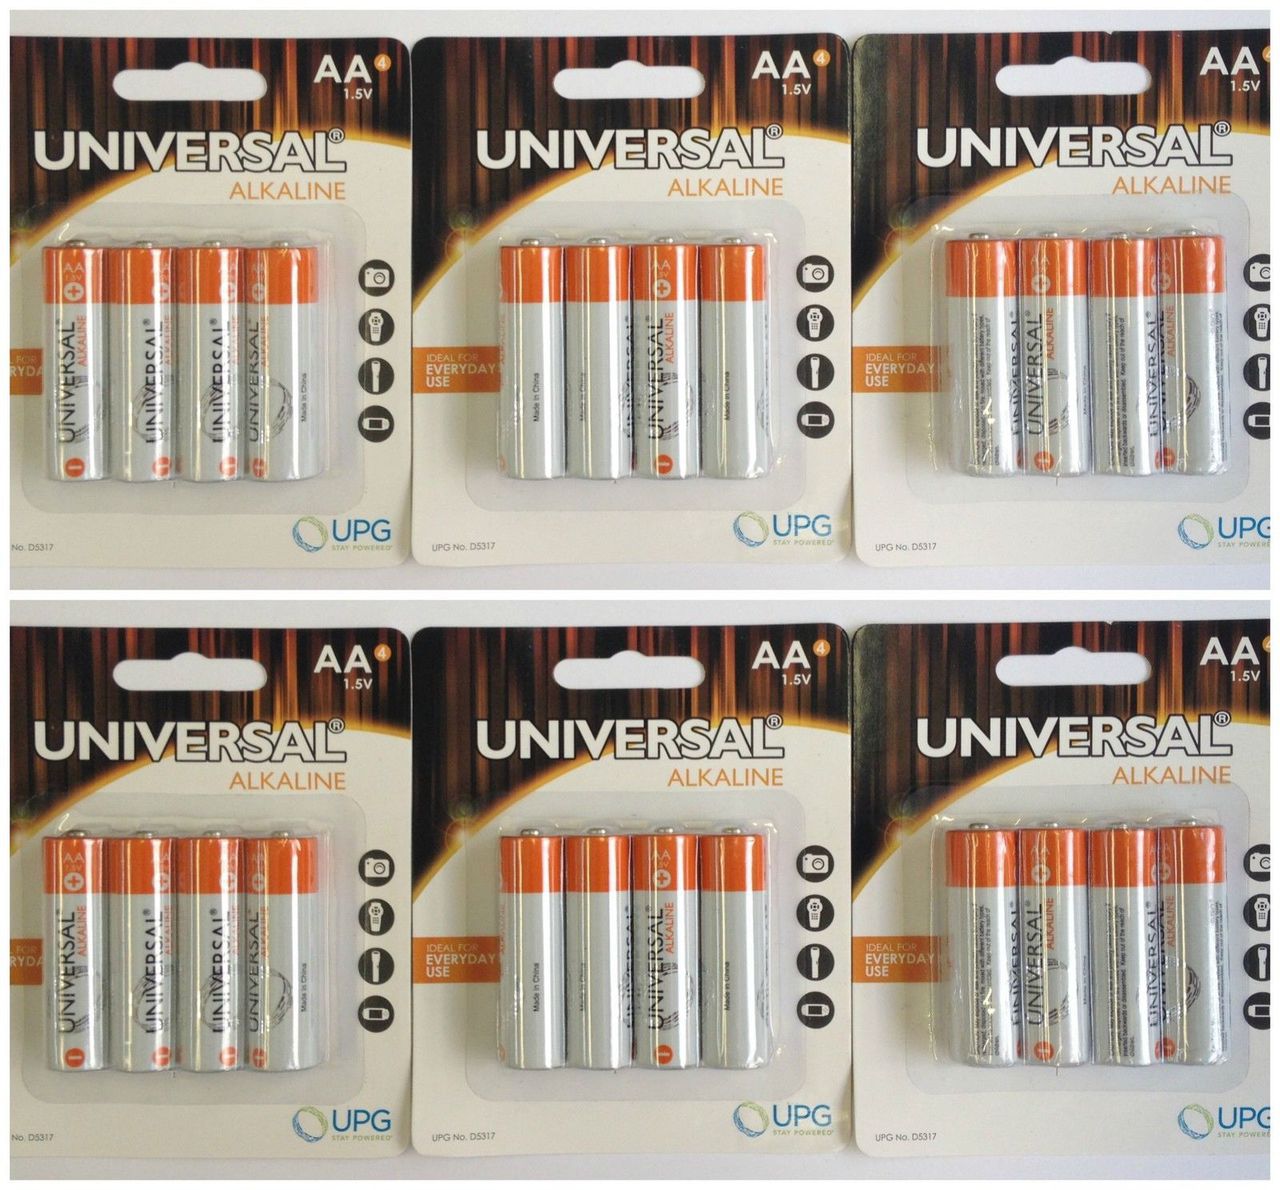 PACK OF 24 UNIVERSAL AA ALKALINE BATTERIES IN RETAIL PACKAGING + FREE SHIPPING